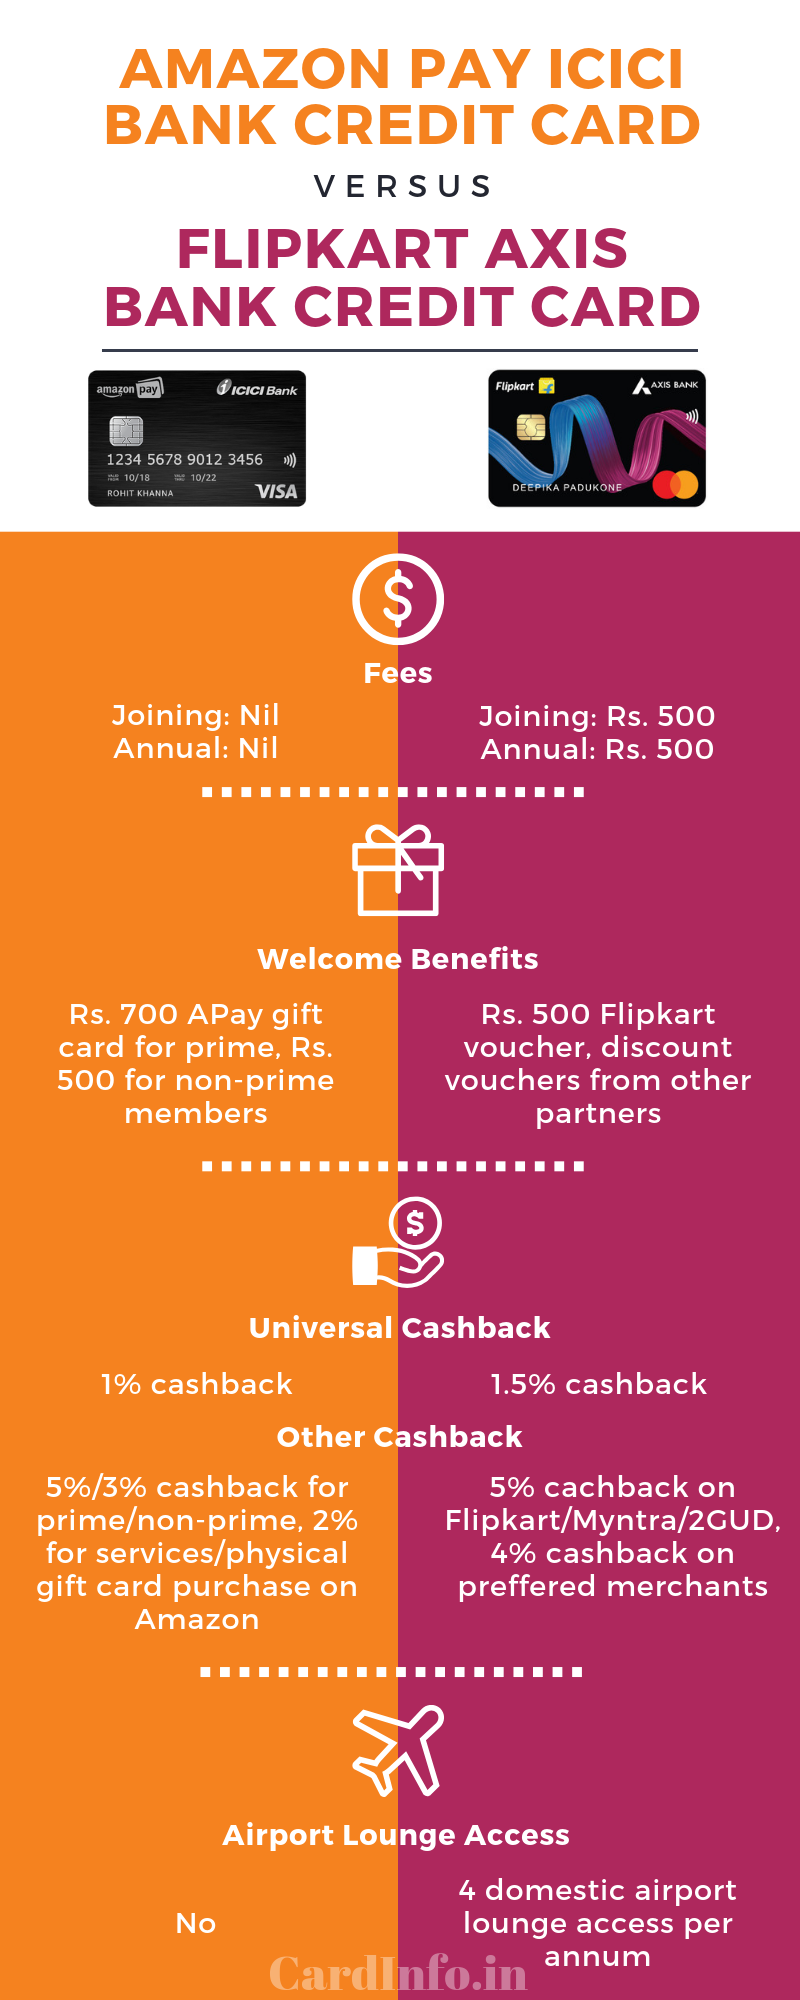 Axis Bank Grab Deals Holi Sale : Get Up To 15% Cashback or 30x Reward Points